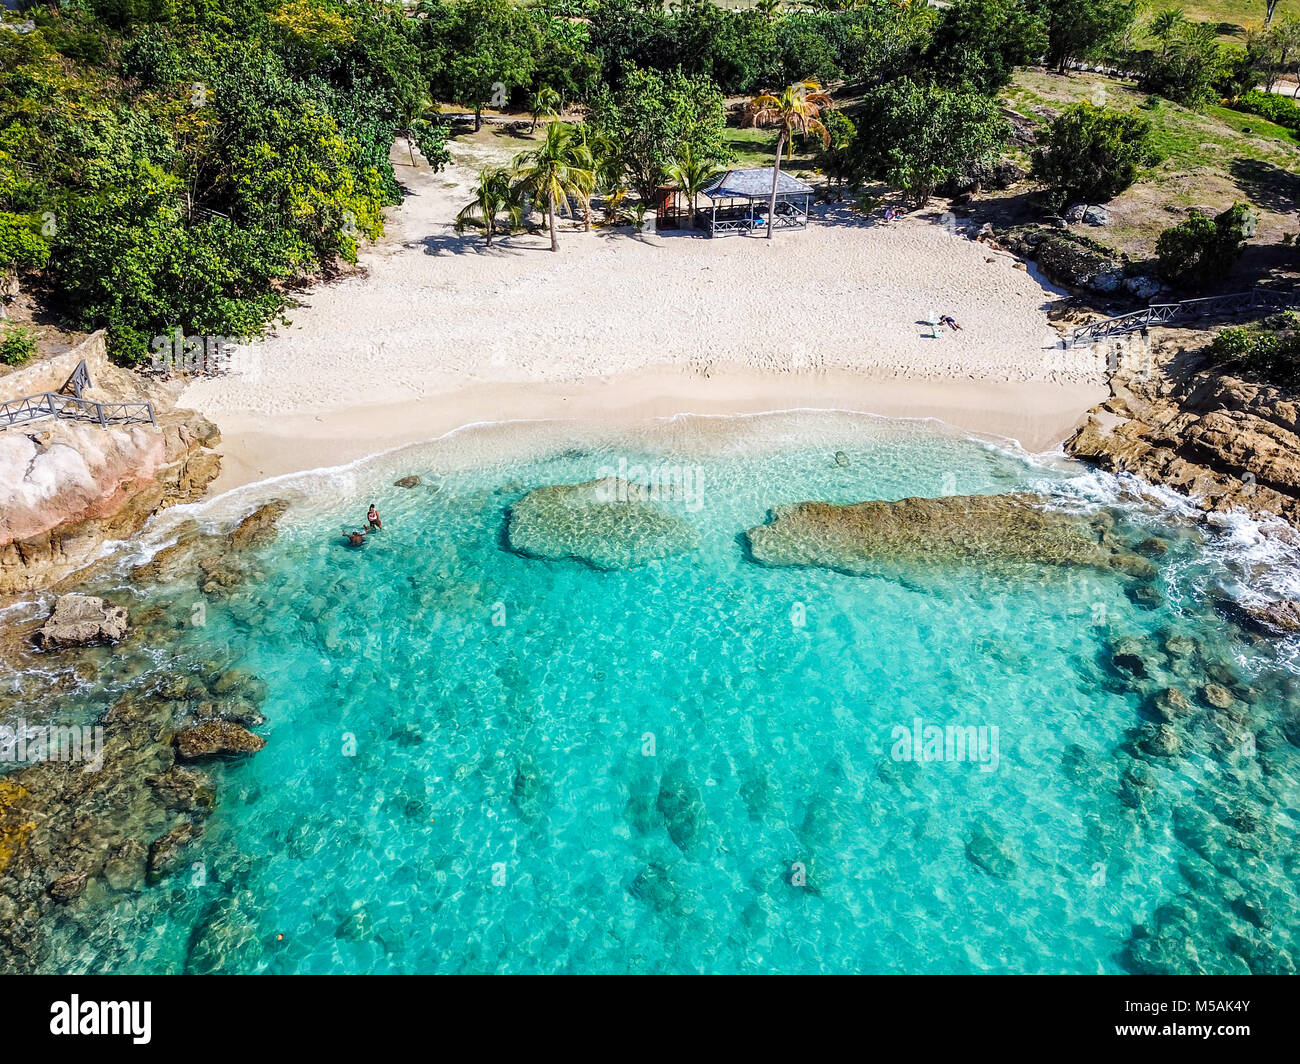 Galley Bay Beach, Antigua Banque D'Images